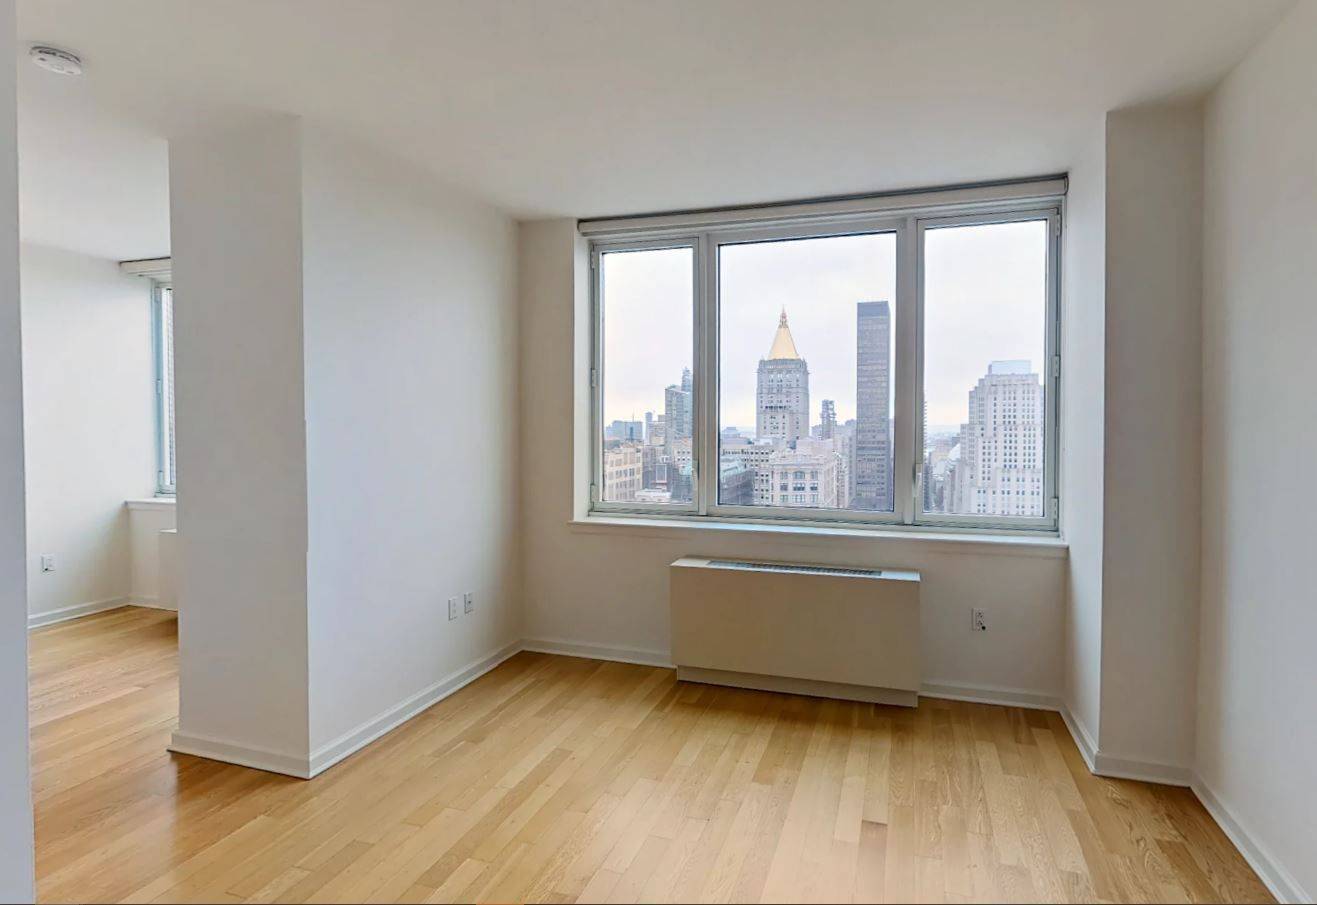 This ALCOVE STUDIO 1BA has incredible skyline views to the east.